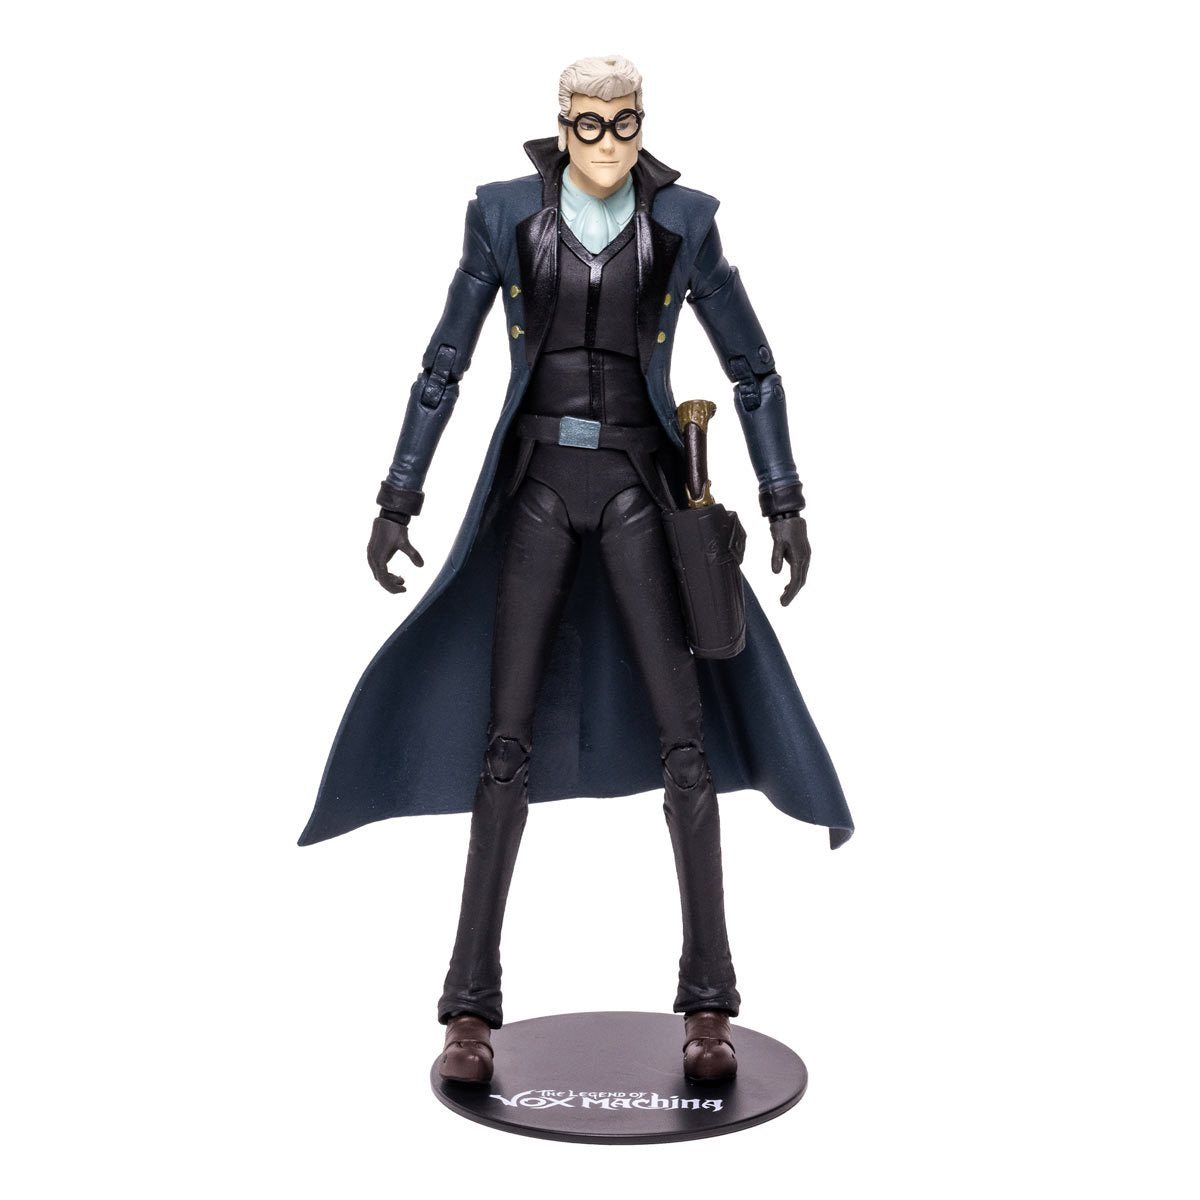 Critical Role: The Legend of Vox Machina - Percy - Action Figure by McFarlane Toys